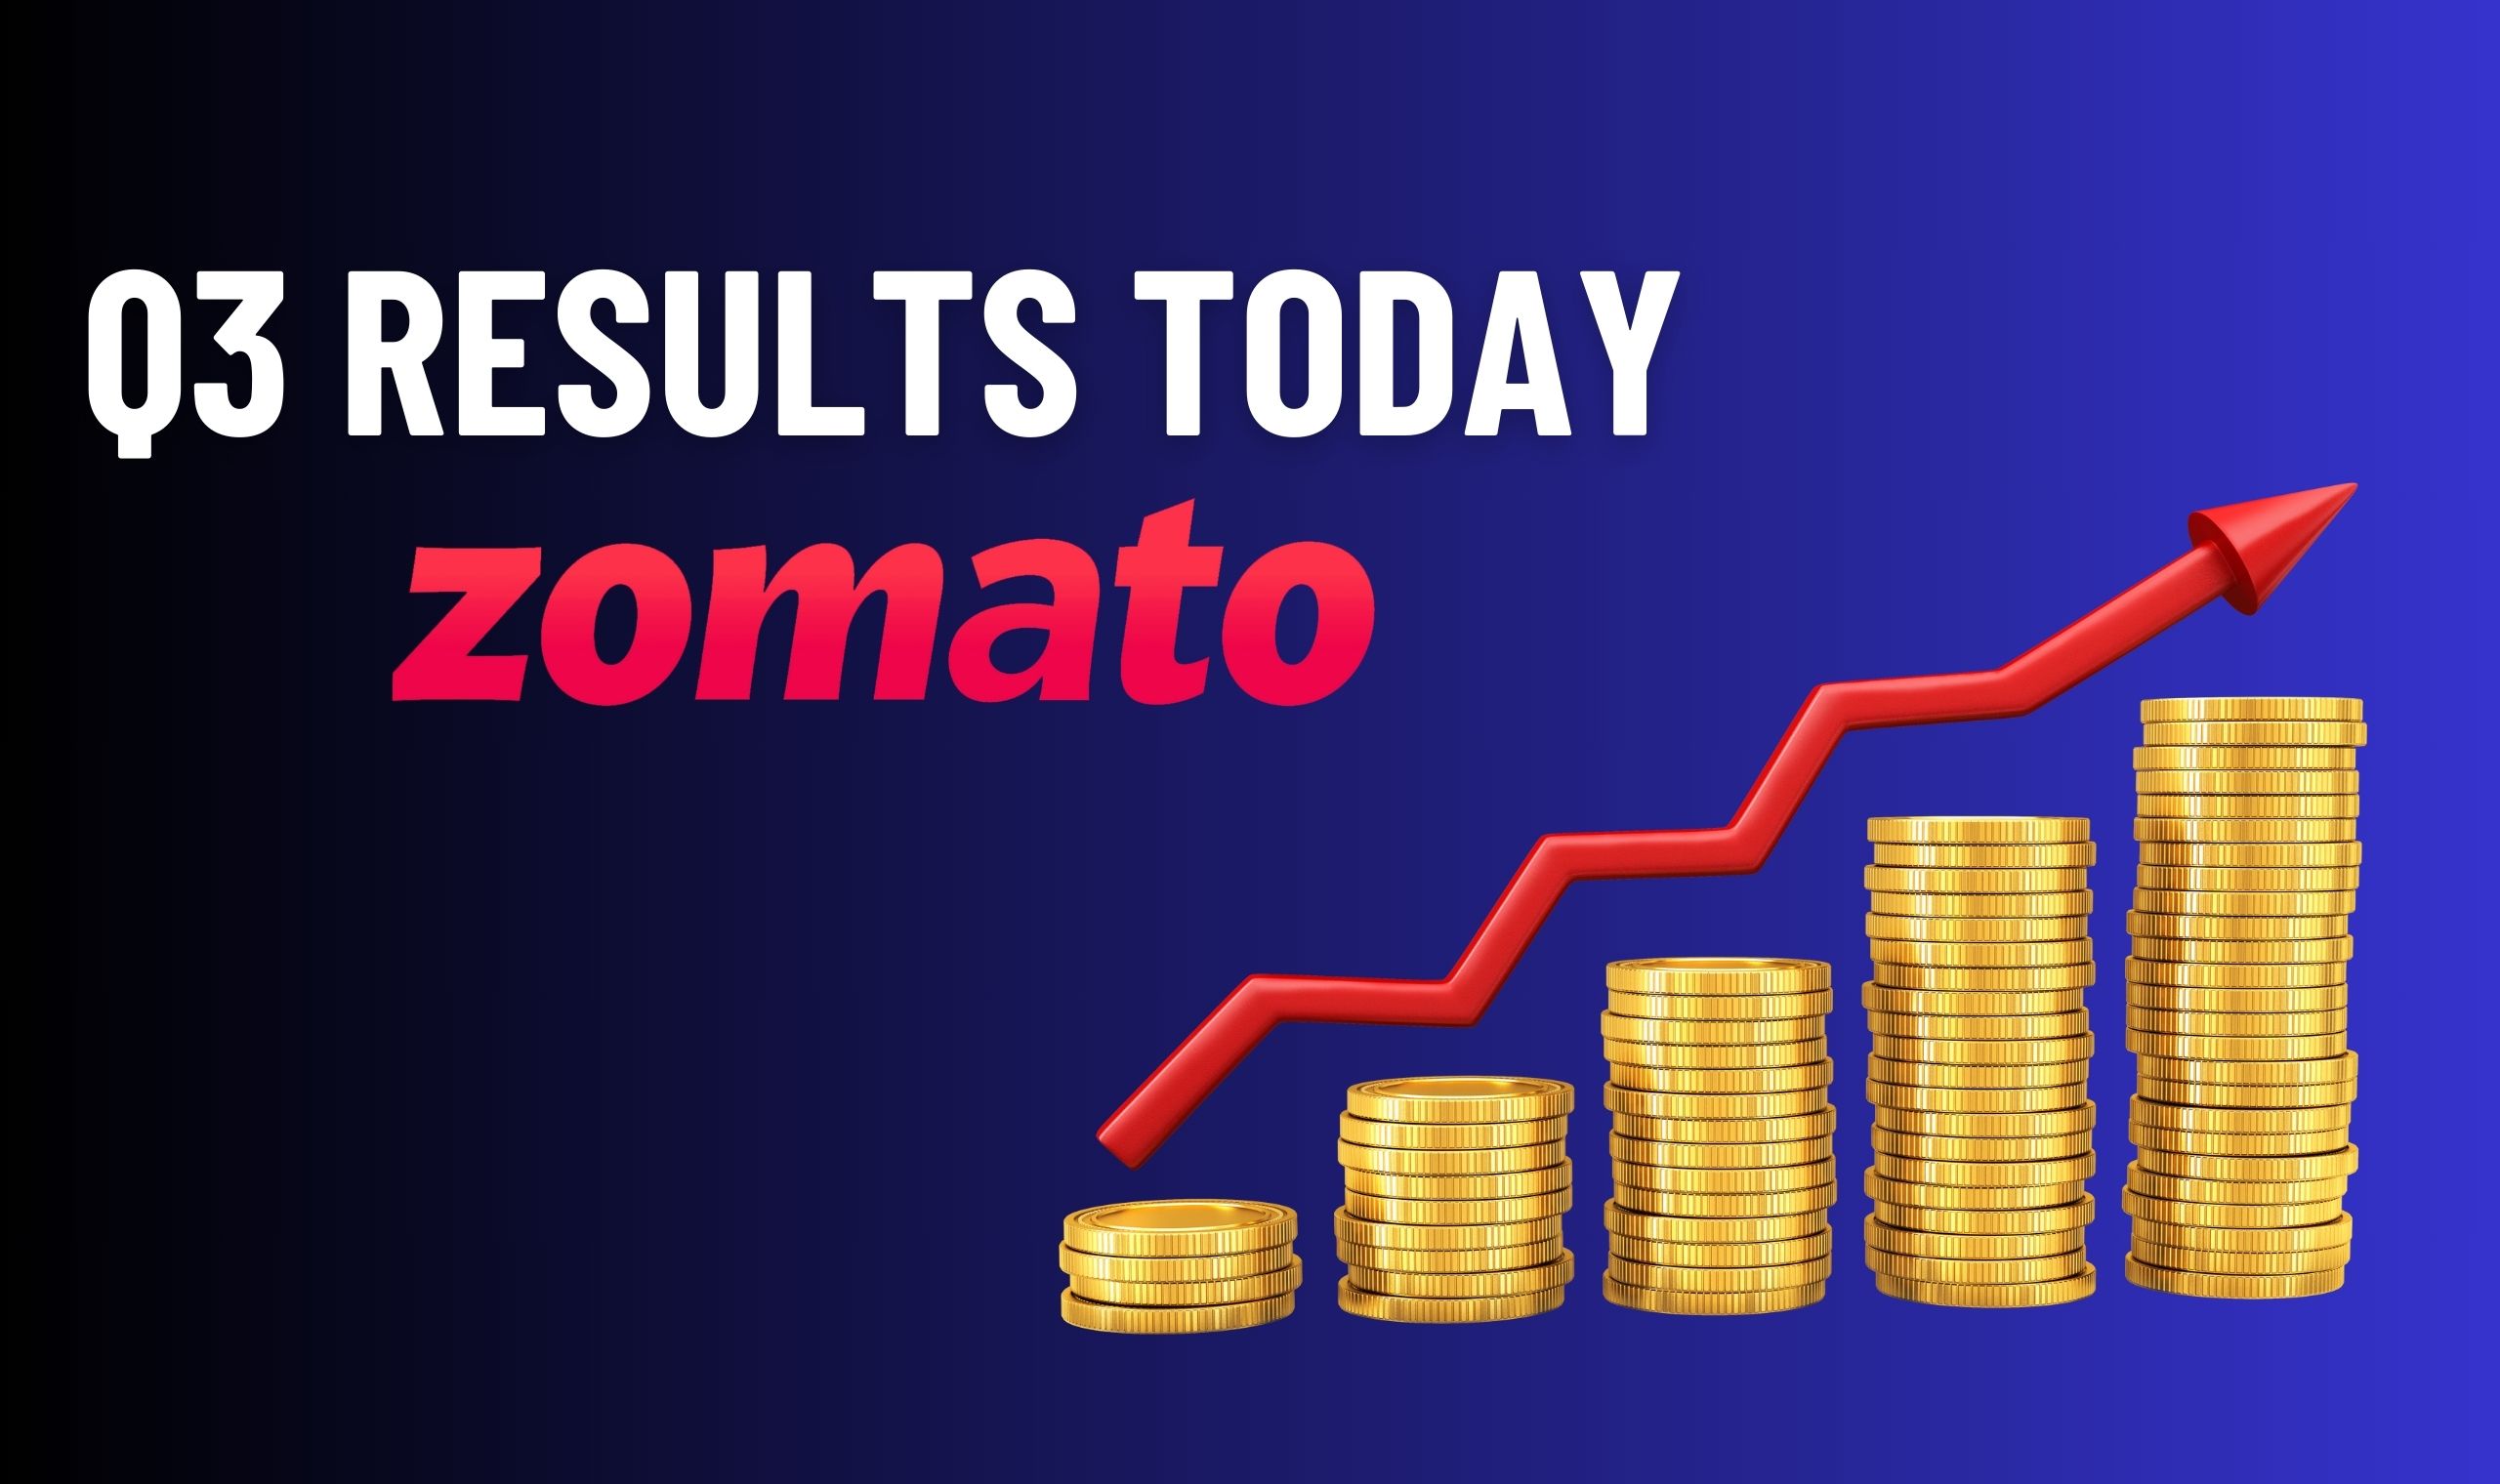 Q3-Results-Today-Earnings-Announcement-from-270-Companies-Including-Zomato-LIC-and-Grasim-Stock-Markets